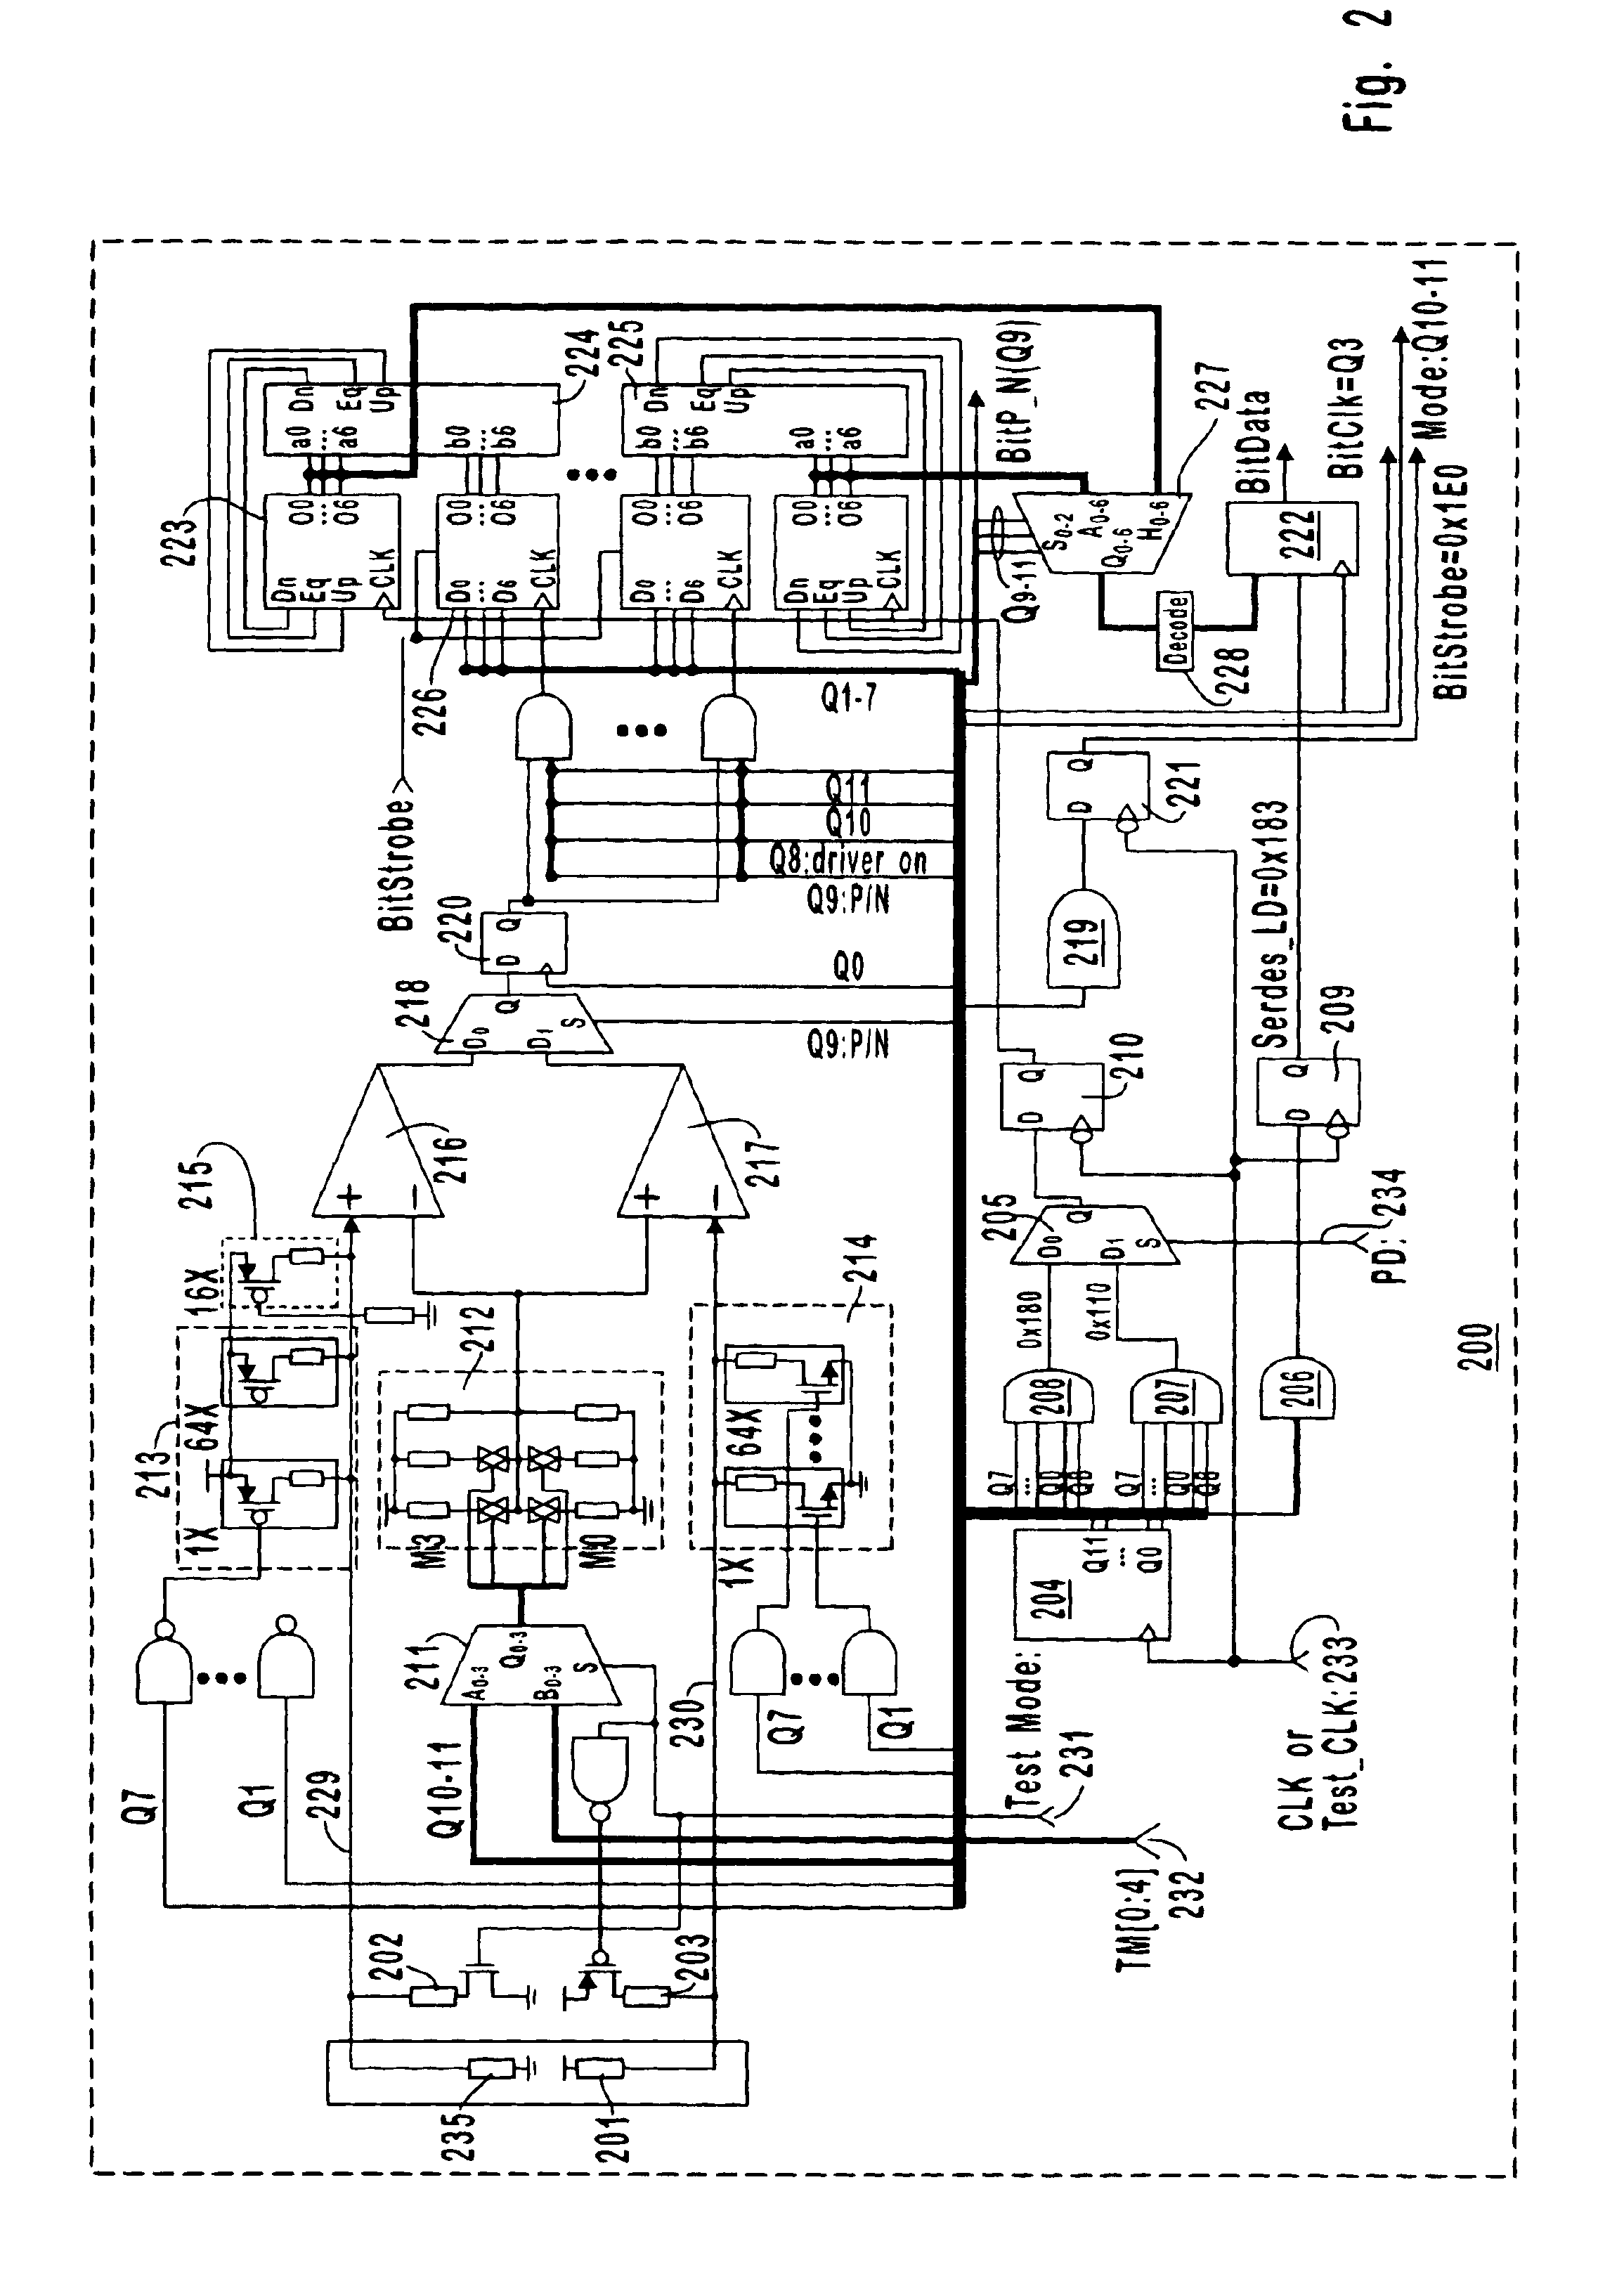 Digitally controlled impedance driver matching for wide voltage swings at input/output node and having programmable step size